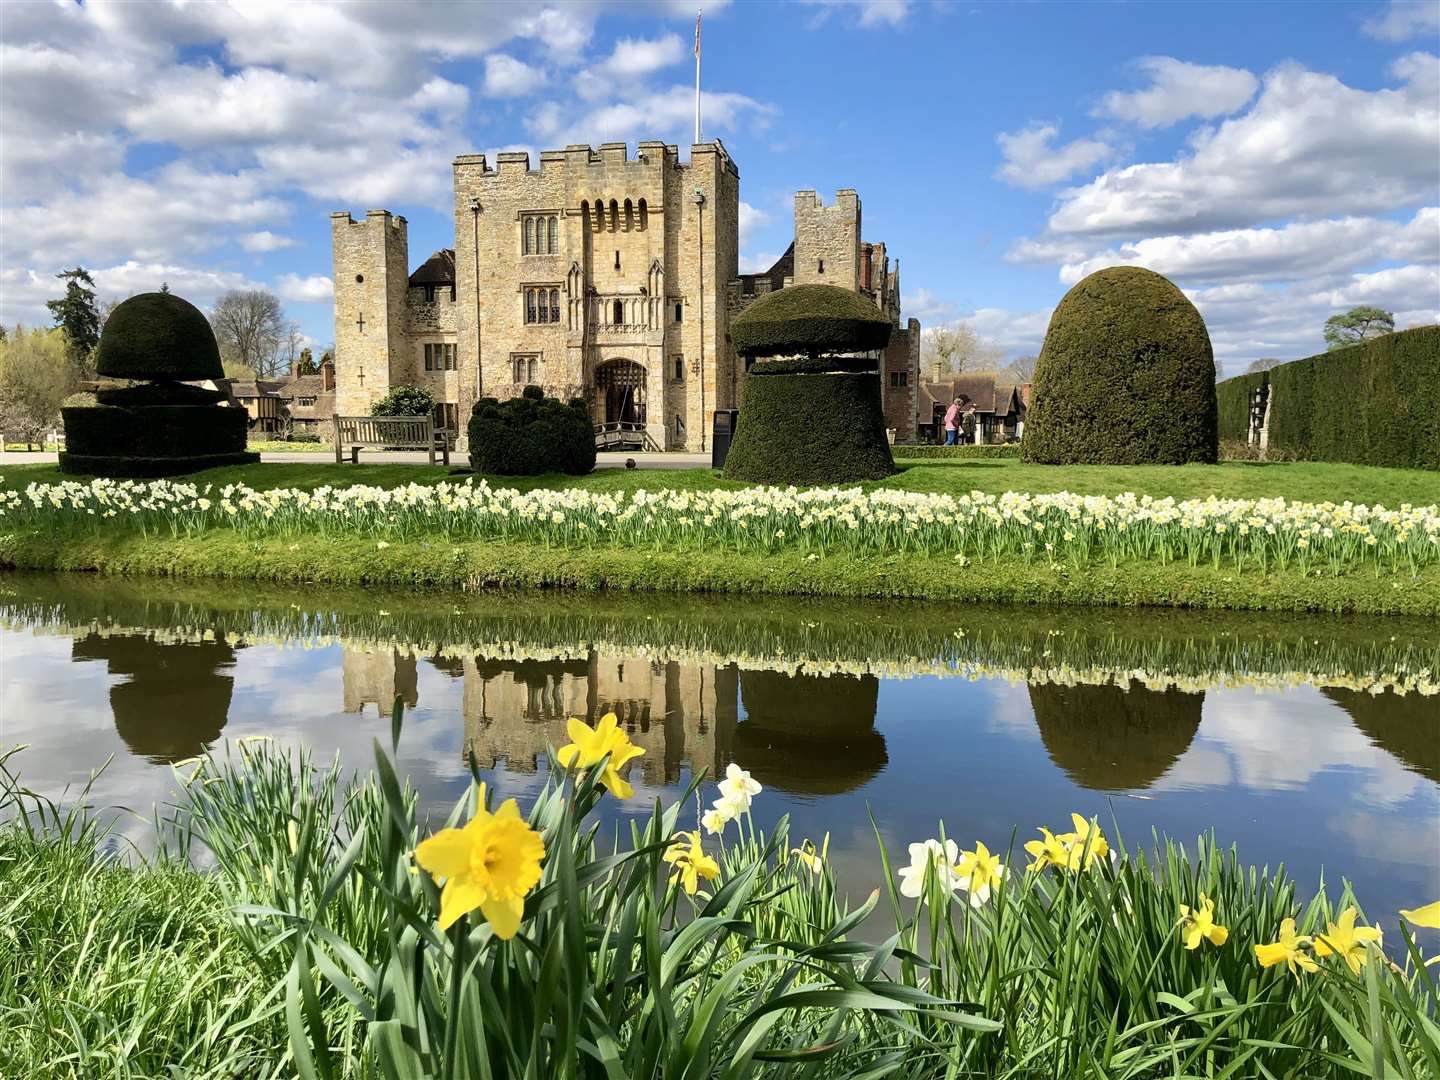 Take the family out for a spring walk through the historic Hever Castle. Picture: Hever Castle and Gardens